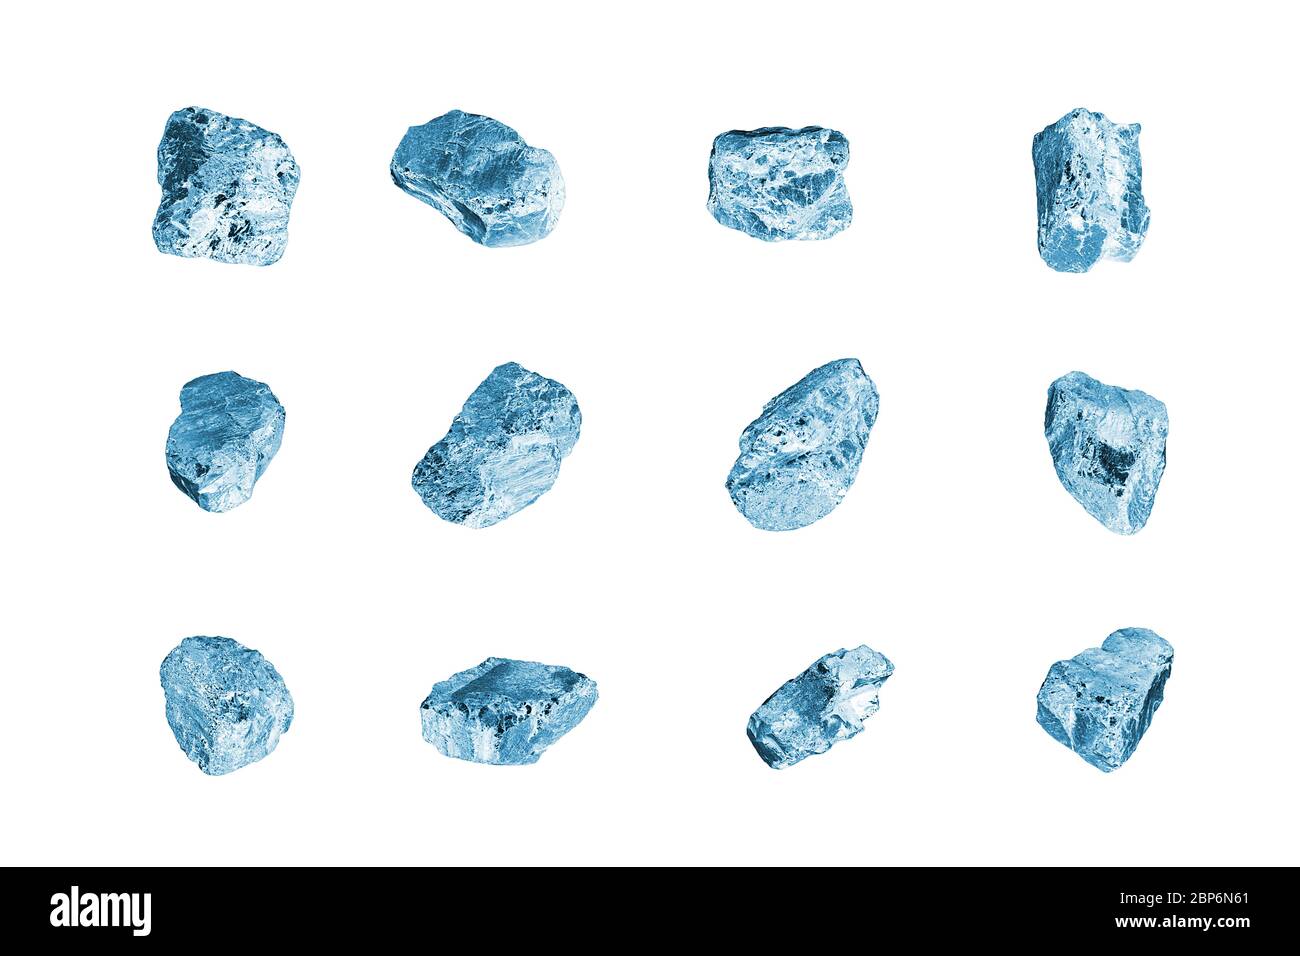 Blue gem stones white background isolated closeup, crushed ice cubes set, rough diamonds collection, raw brilliants texture, rocks, crystals, mineral Stock Photo